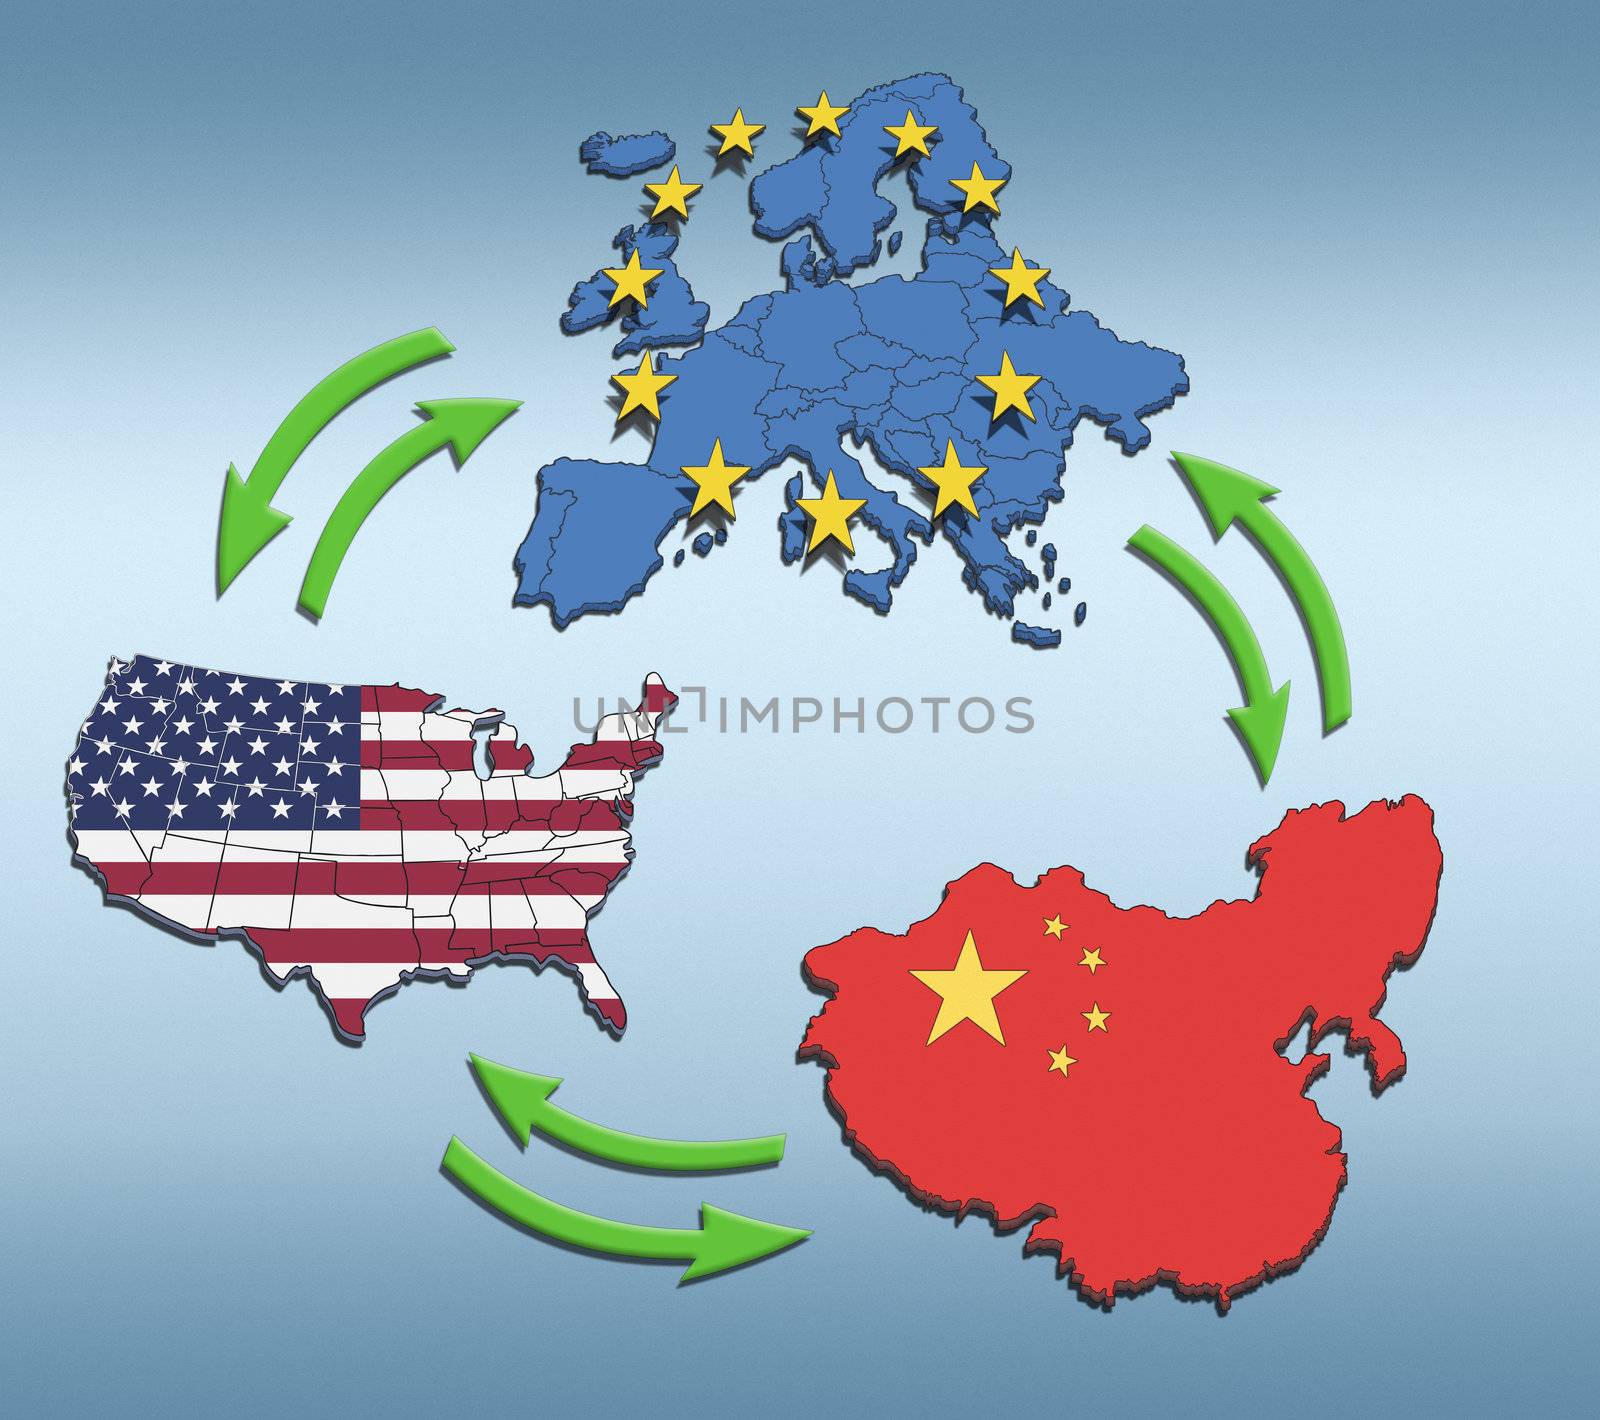 USA, Europe and China Interatction. by Alvinge